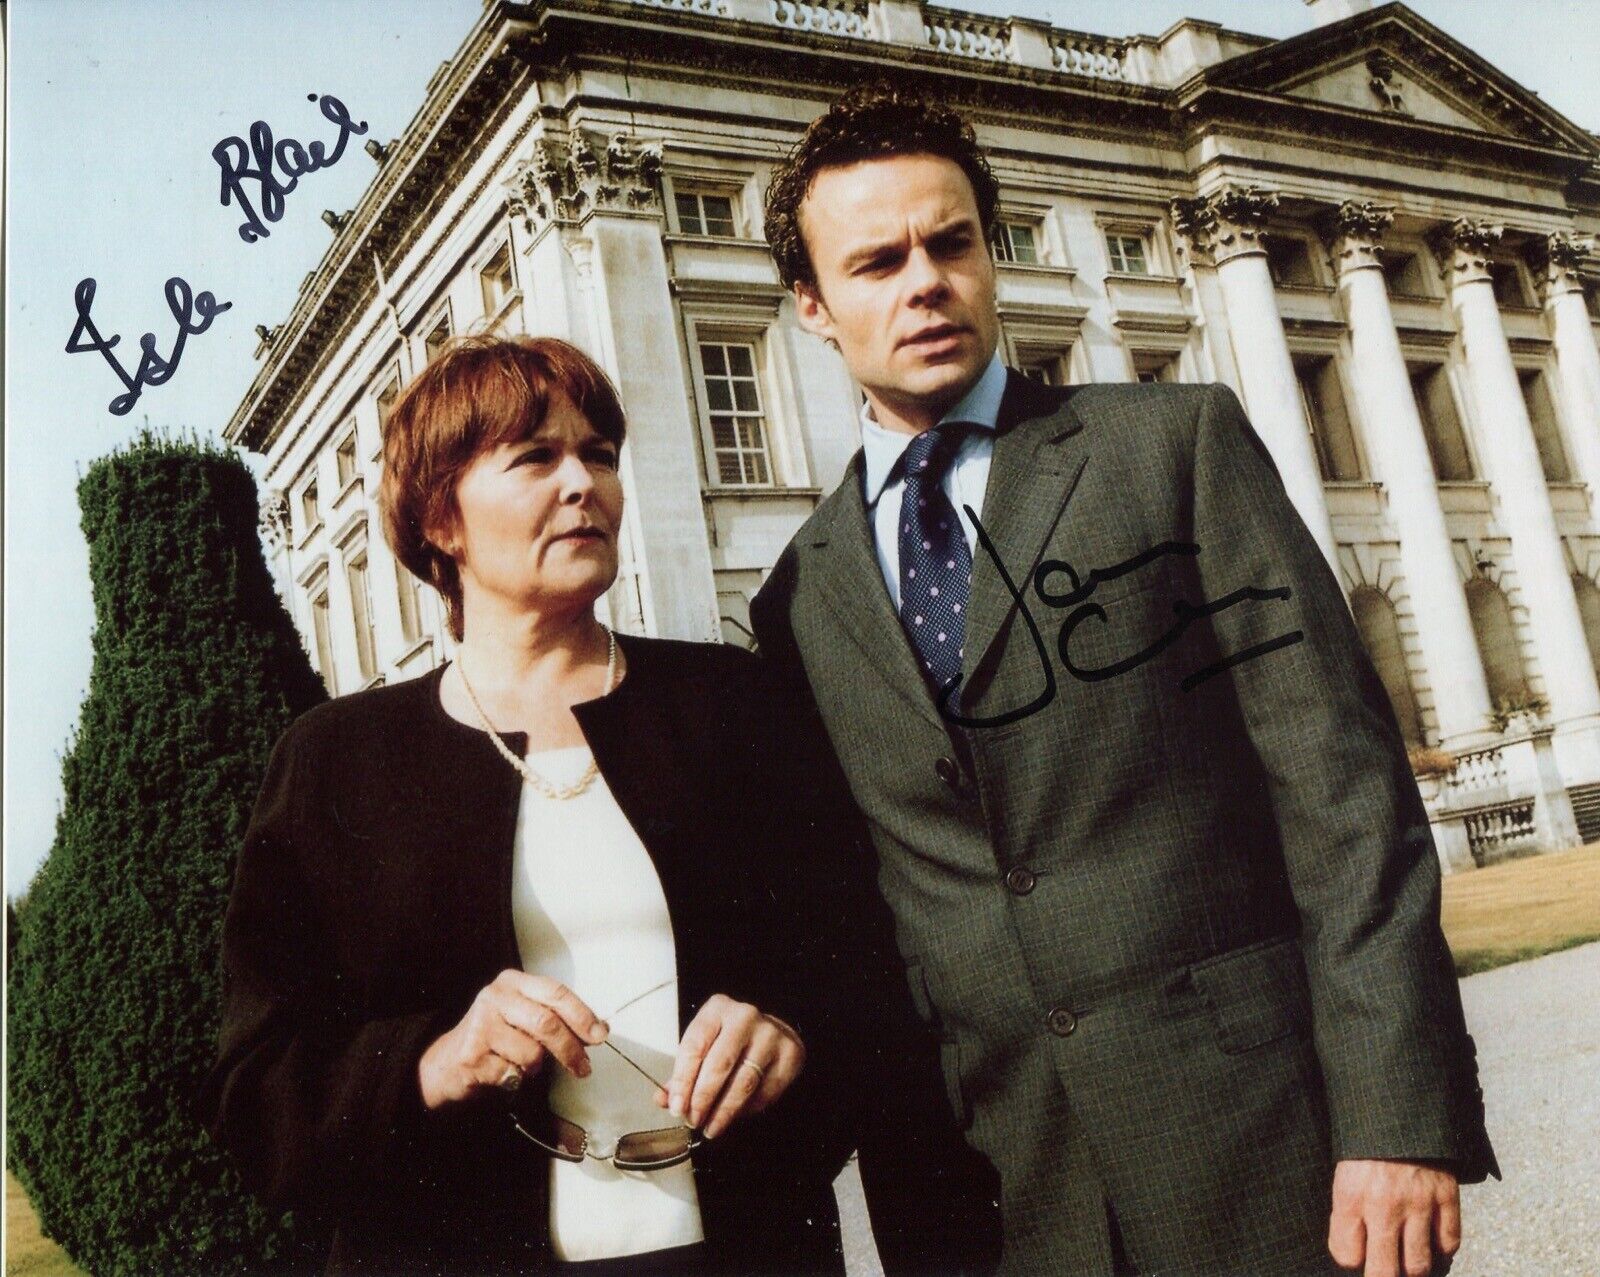 Jamie Glover and Isla Blair signed NEW TRICKS 8x10 scene Photo Poster painting